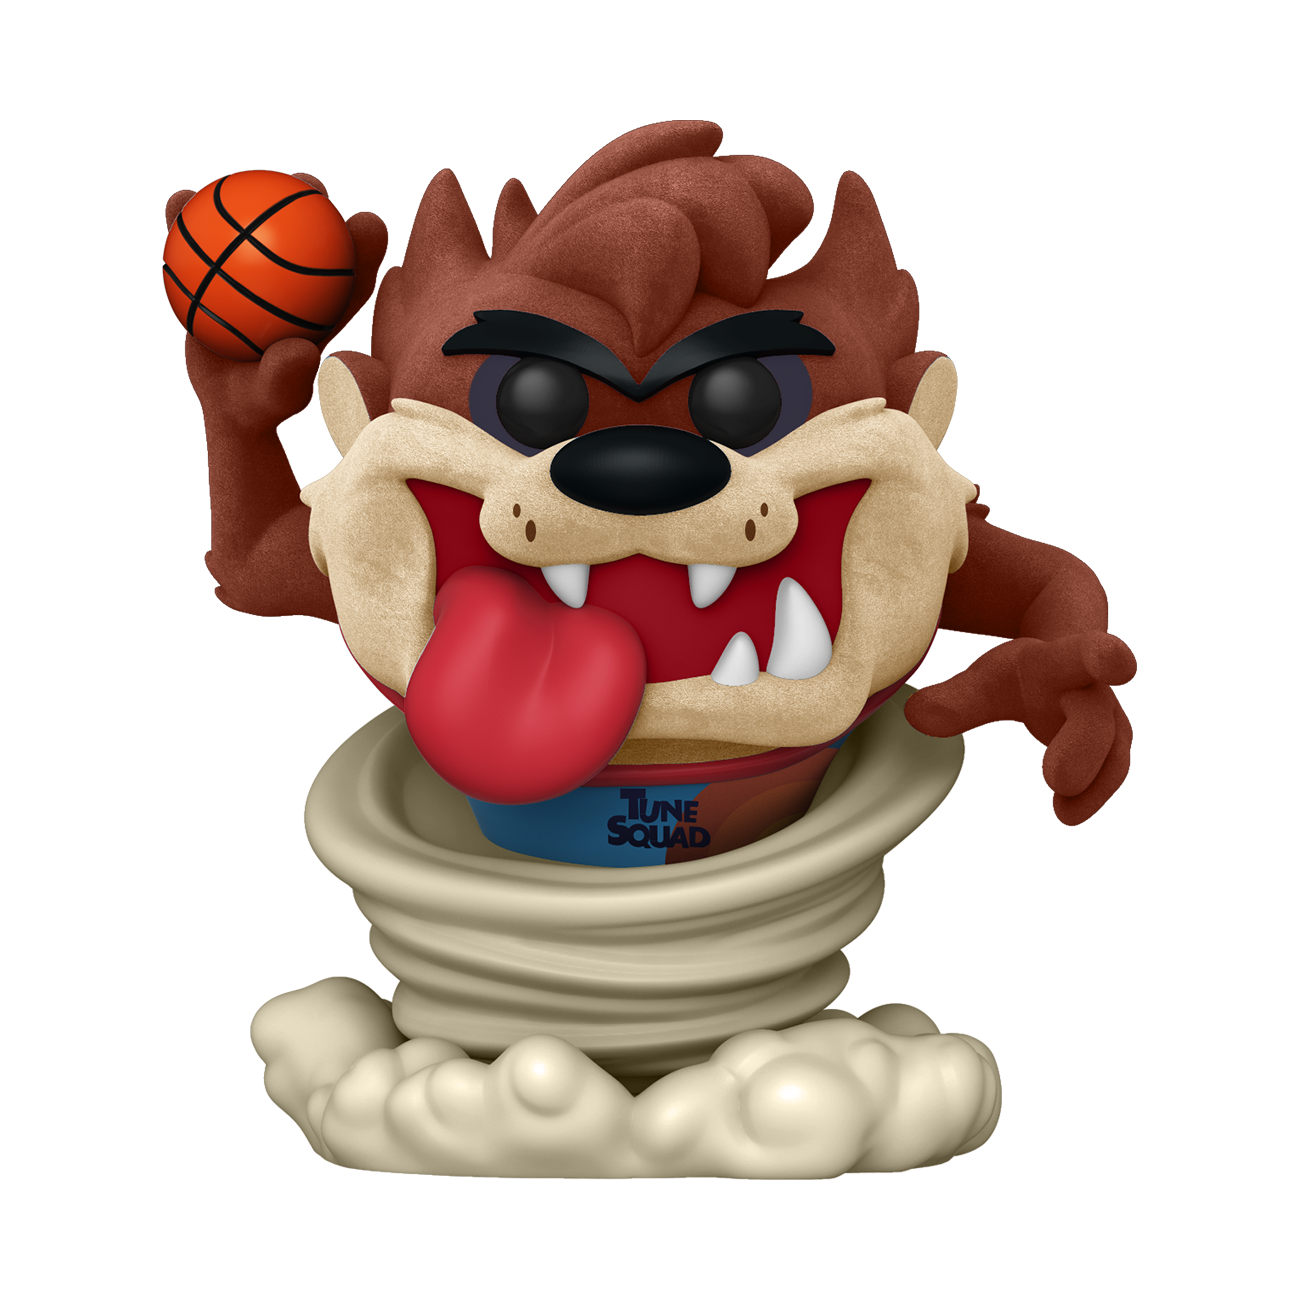 Funko POP! Movies: Space Jam: A New Legacy - Taz (Flocked) - Walmart Exclusive - image 1 of 2